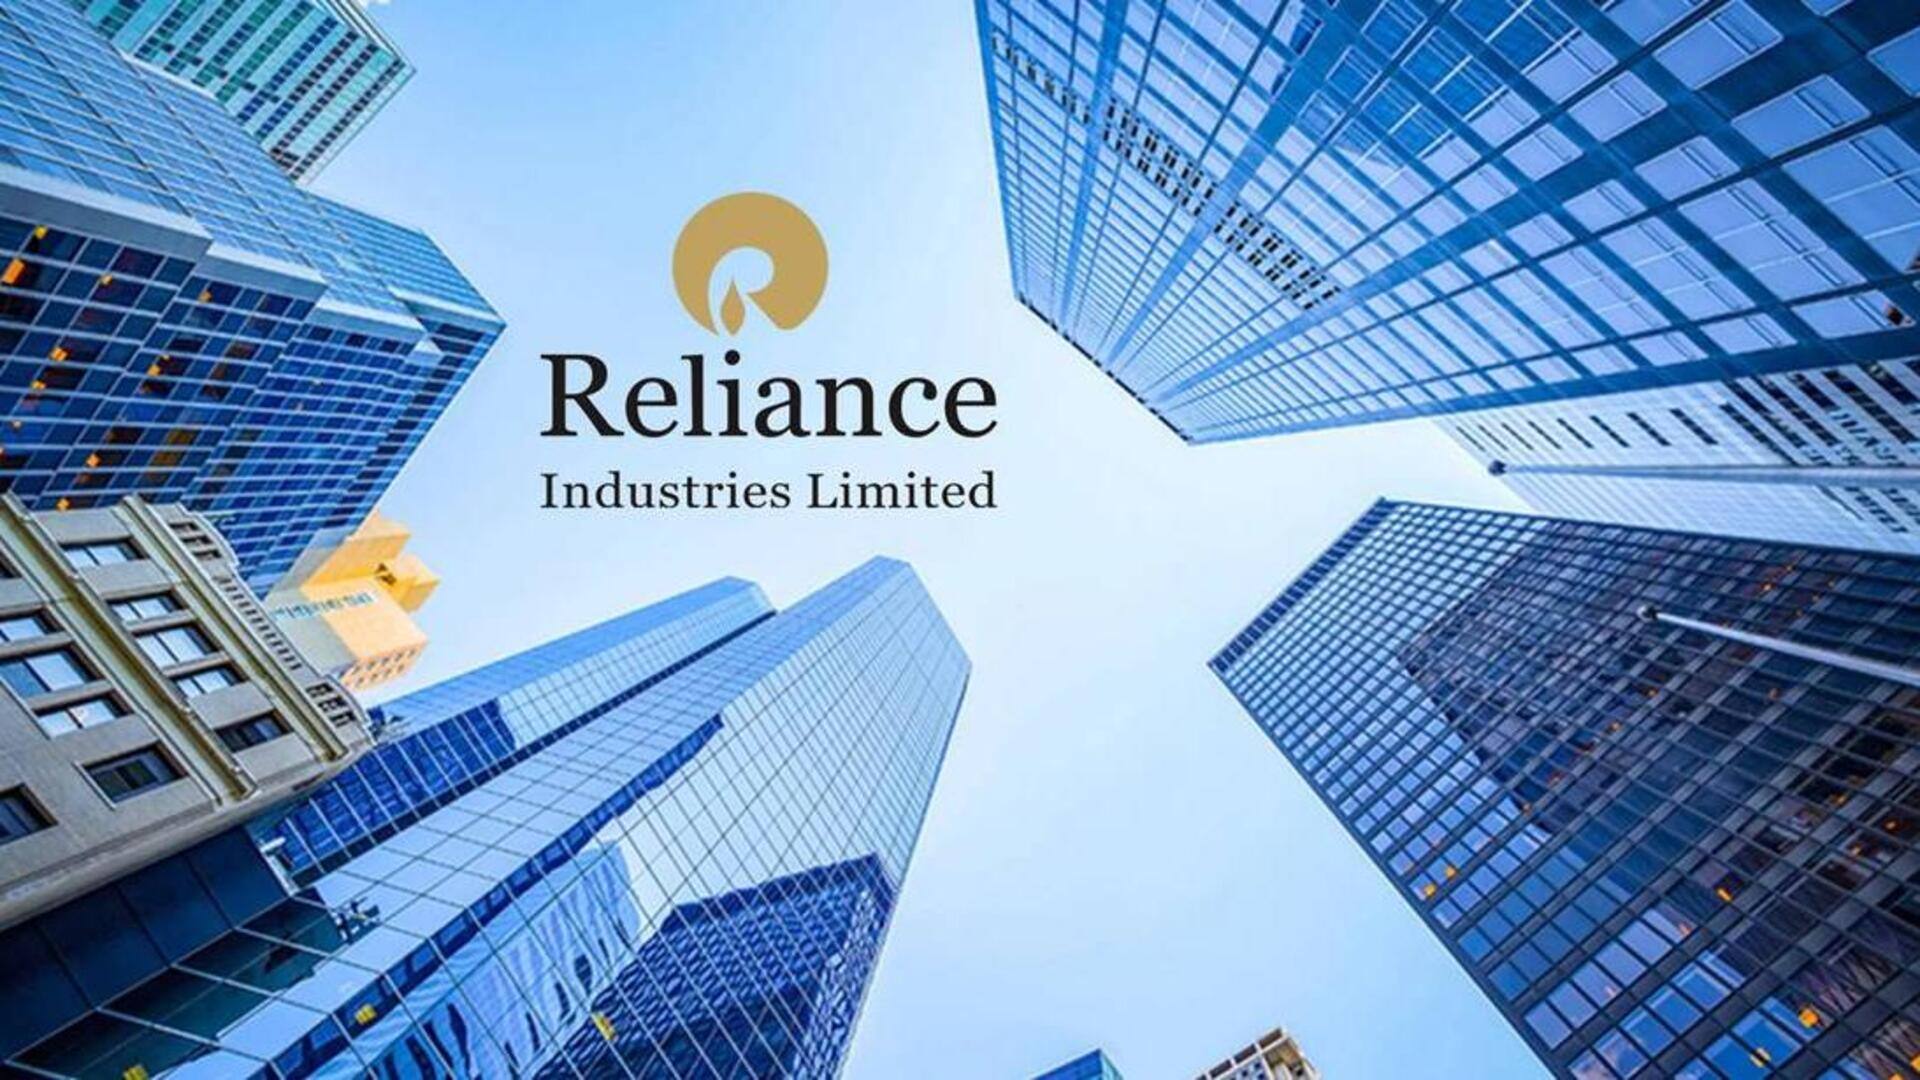 Reliance becomes the most valuable company in India